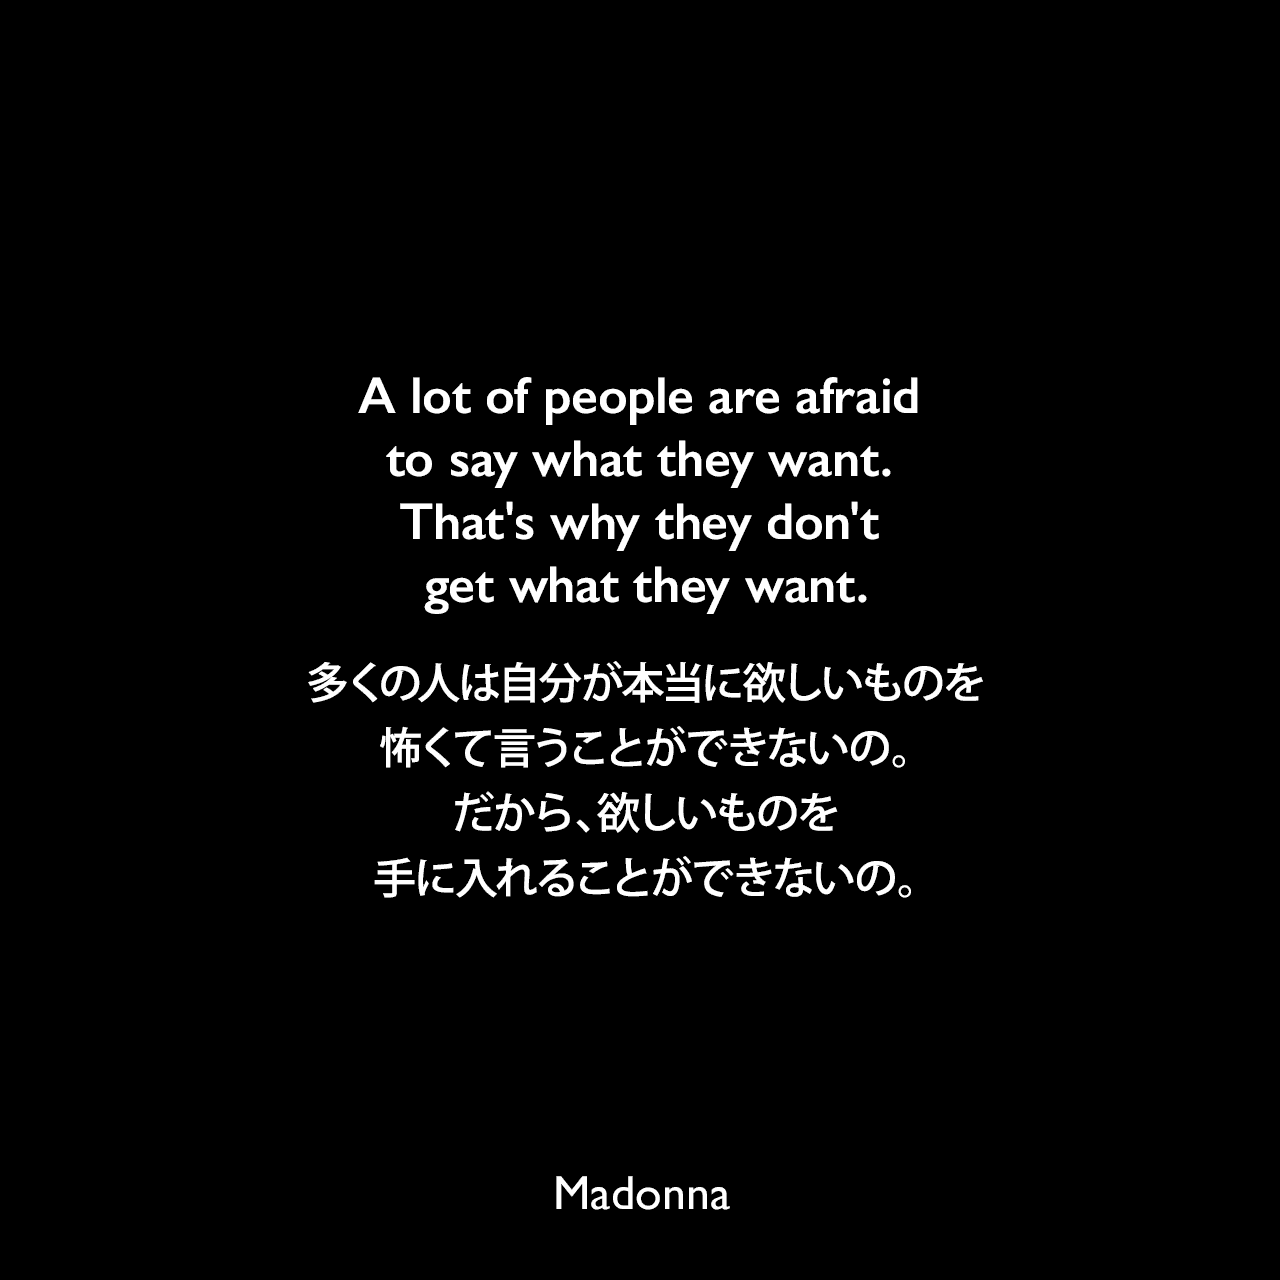 A lot of people are afraid to say what they want. That's why they don't get what they want.多くの人は自分が本当に欲しいものを怖くて言うことができないの。だから、欲しいものを手に入れることができないの。- マドンナによる本「SEX」よりMadonna